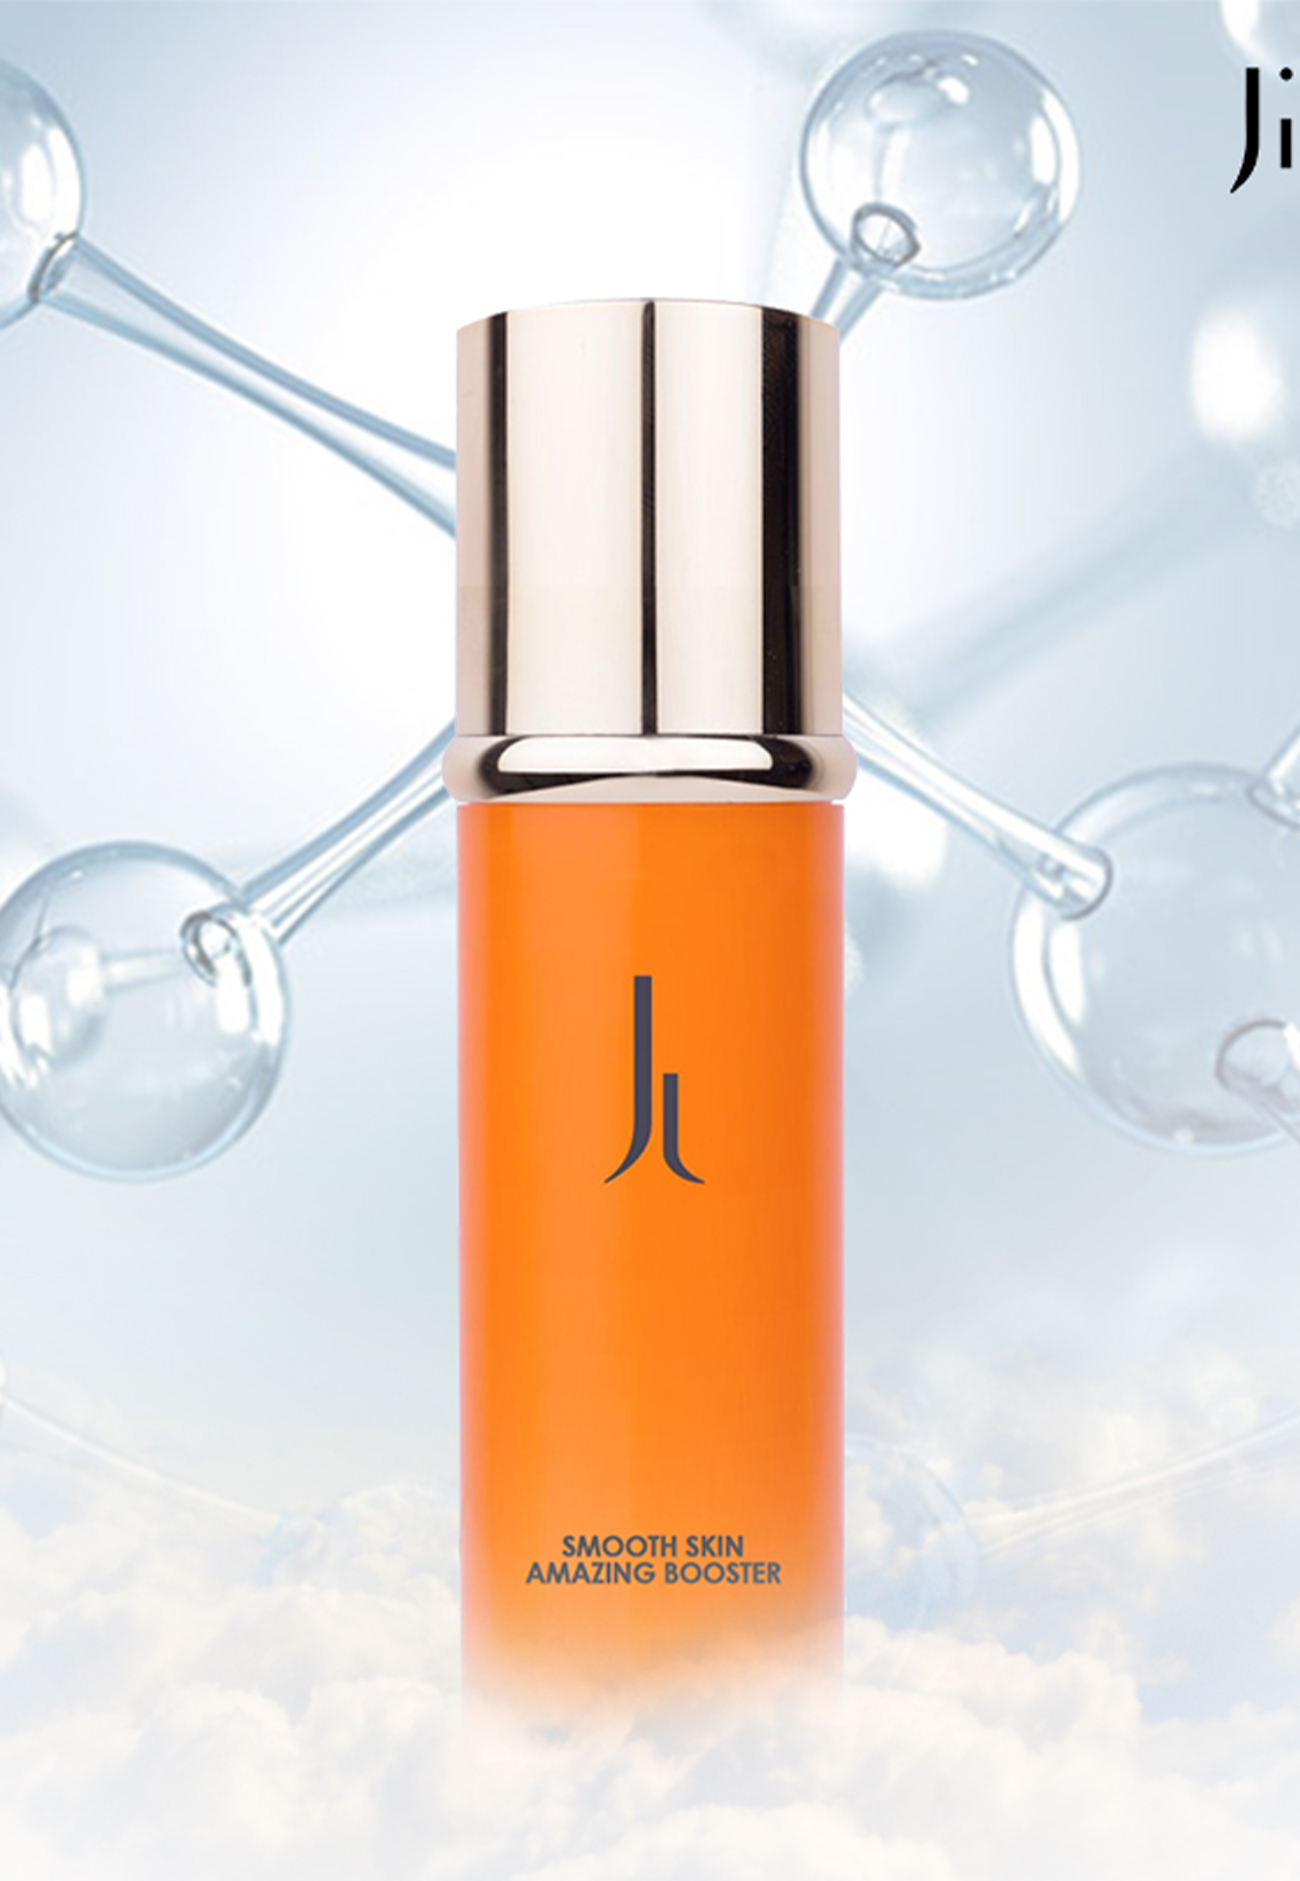 Experience the Intense Skin Hydration of Hyaluronic Acid